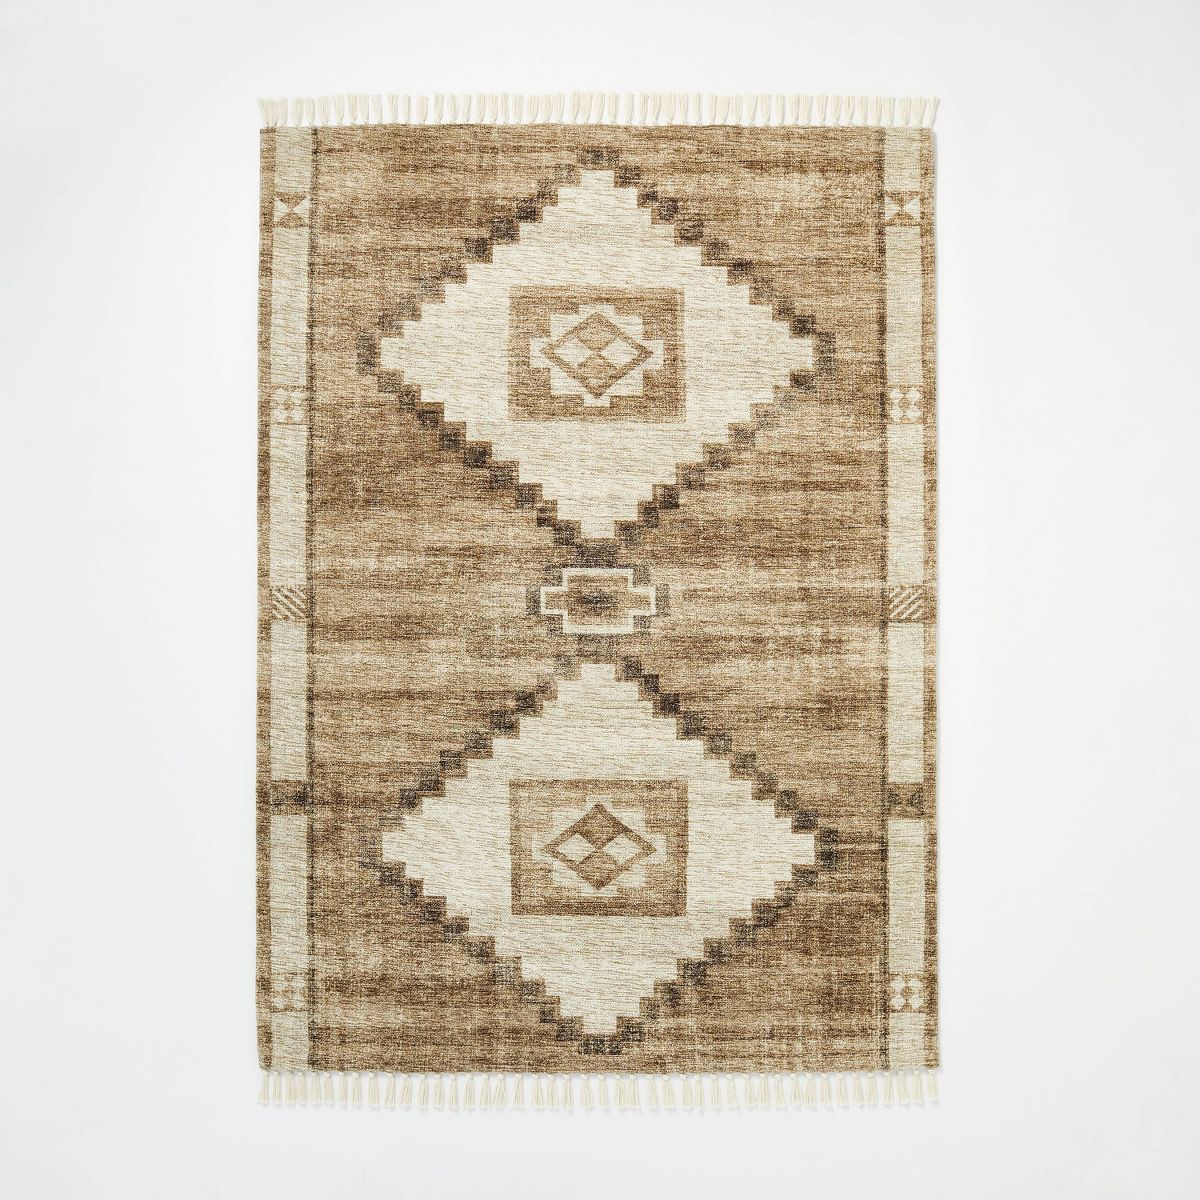 Double Medallion Persian Style Rug Tan - Threshold™ designed with Studio McGee | Target